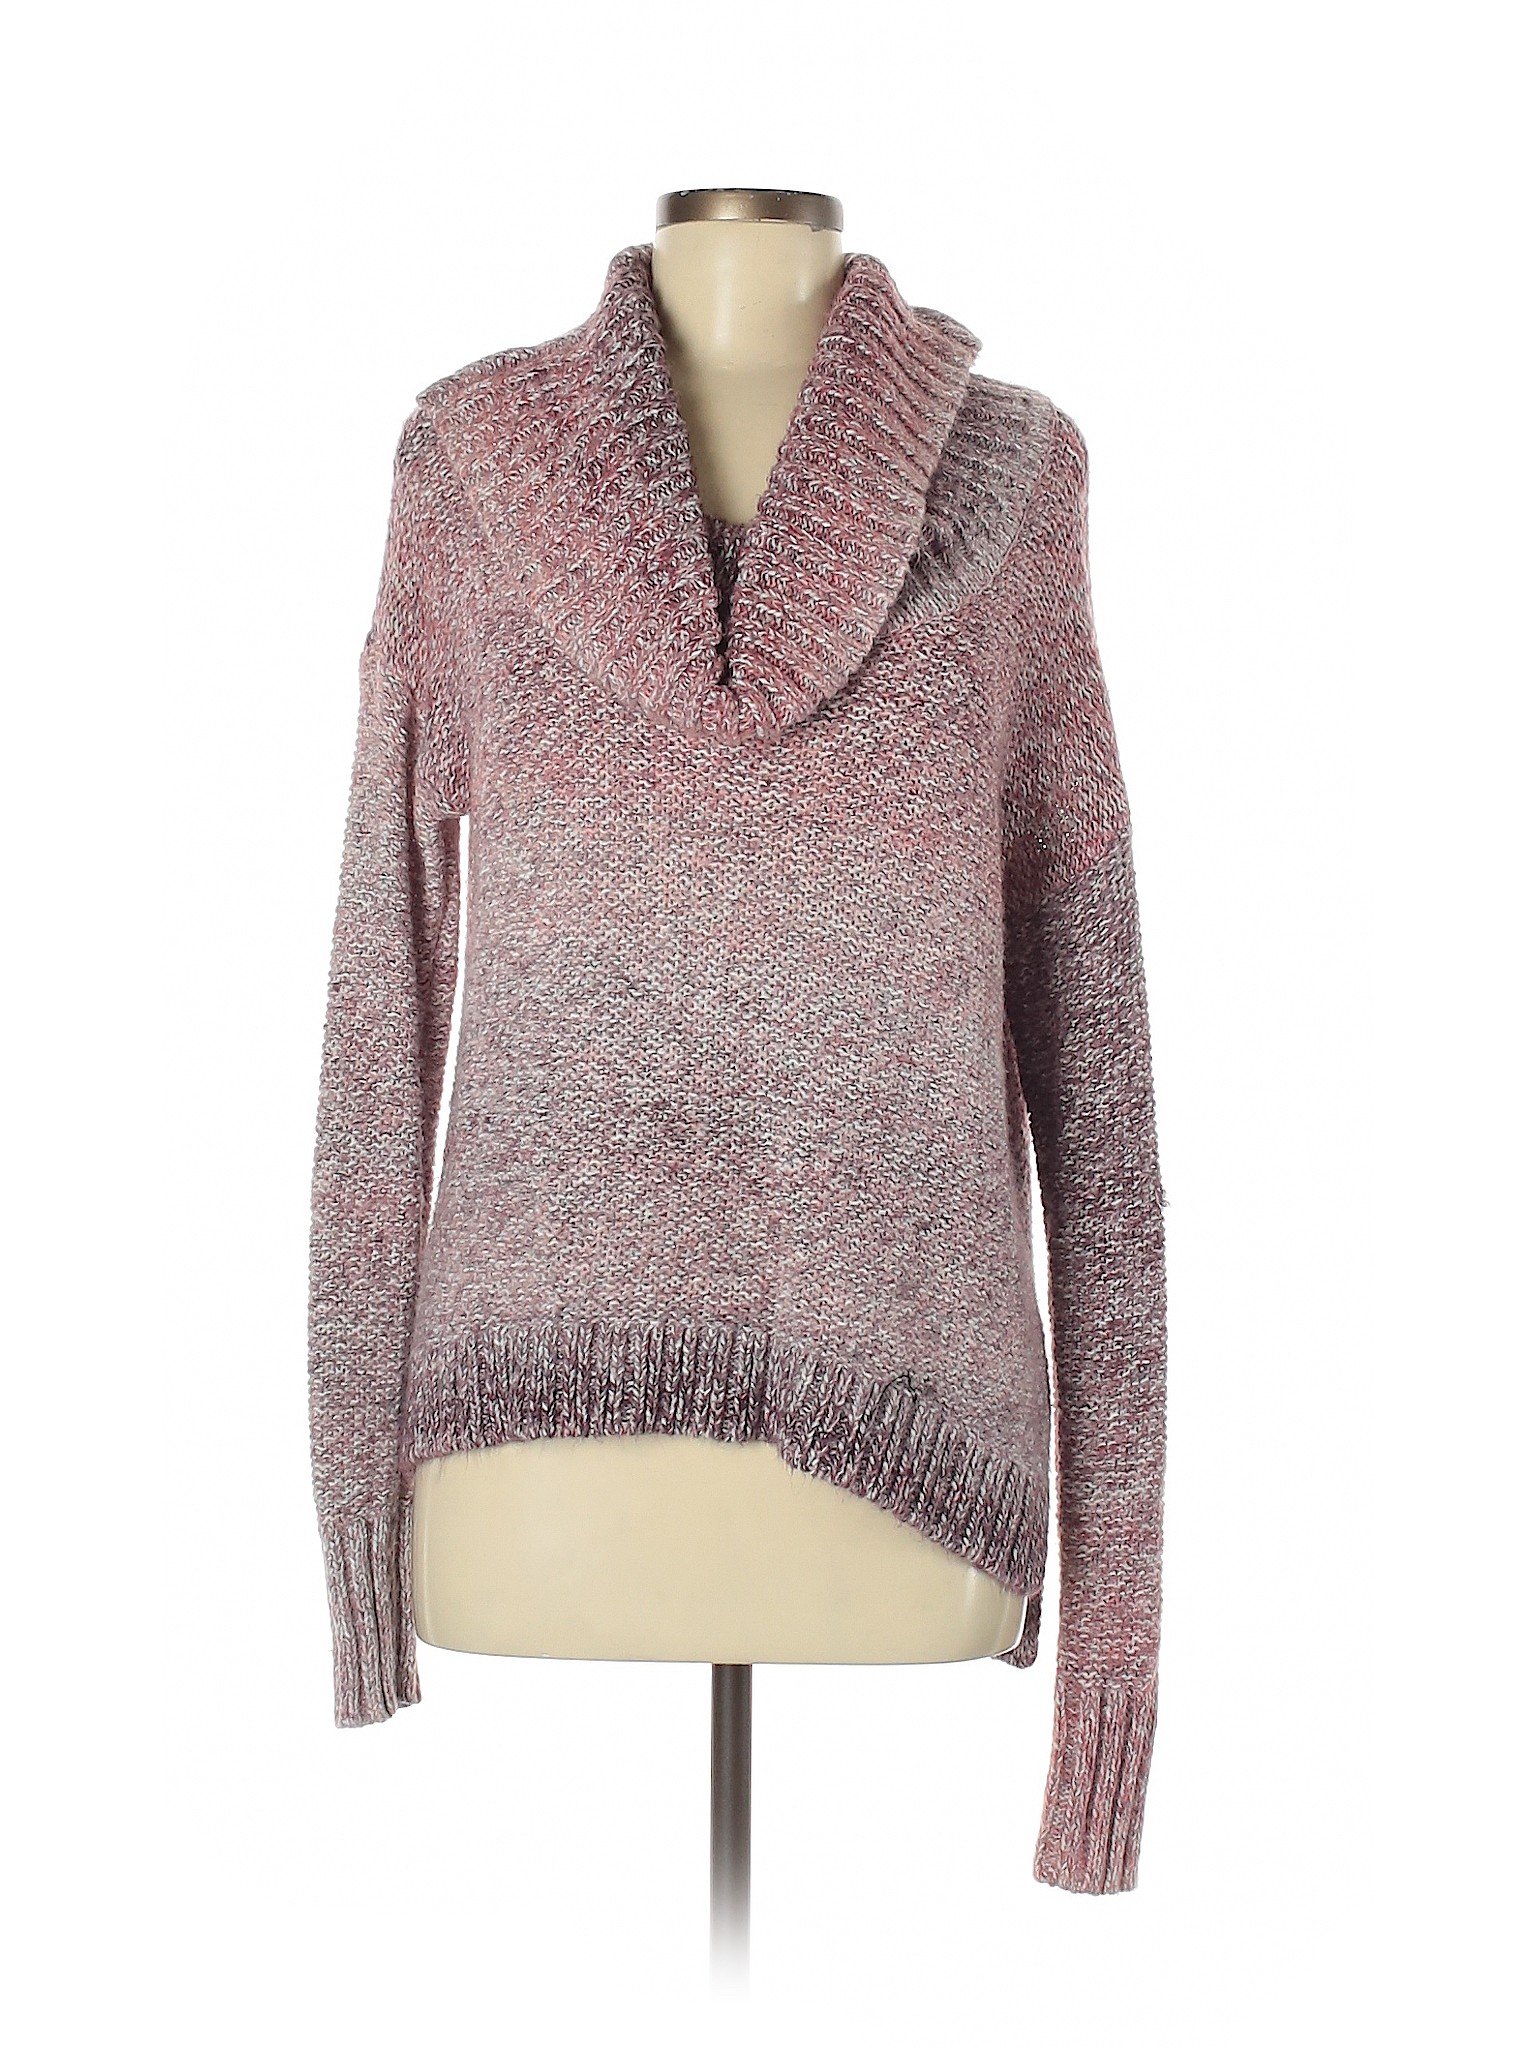 American Eagle Outfitters Women Pink Pullover Sweater M | eBay